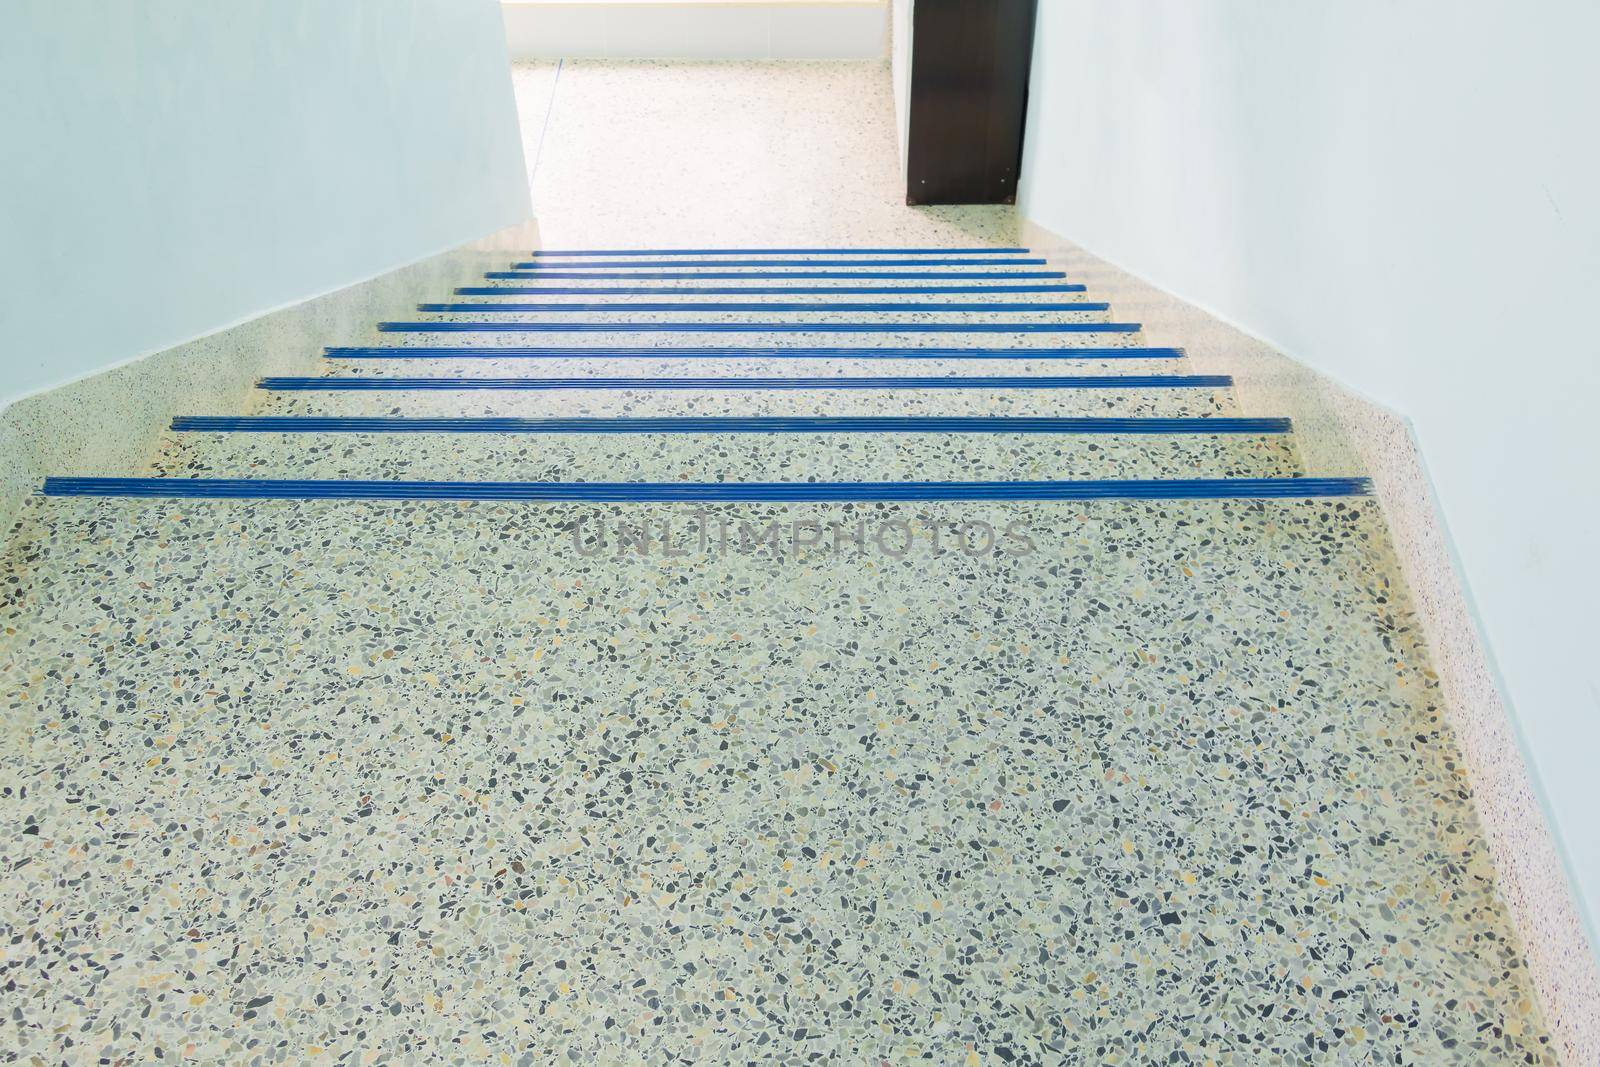 stairs walkway down terrazzo floor. select focus with shallow depth of field